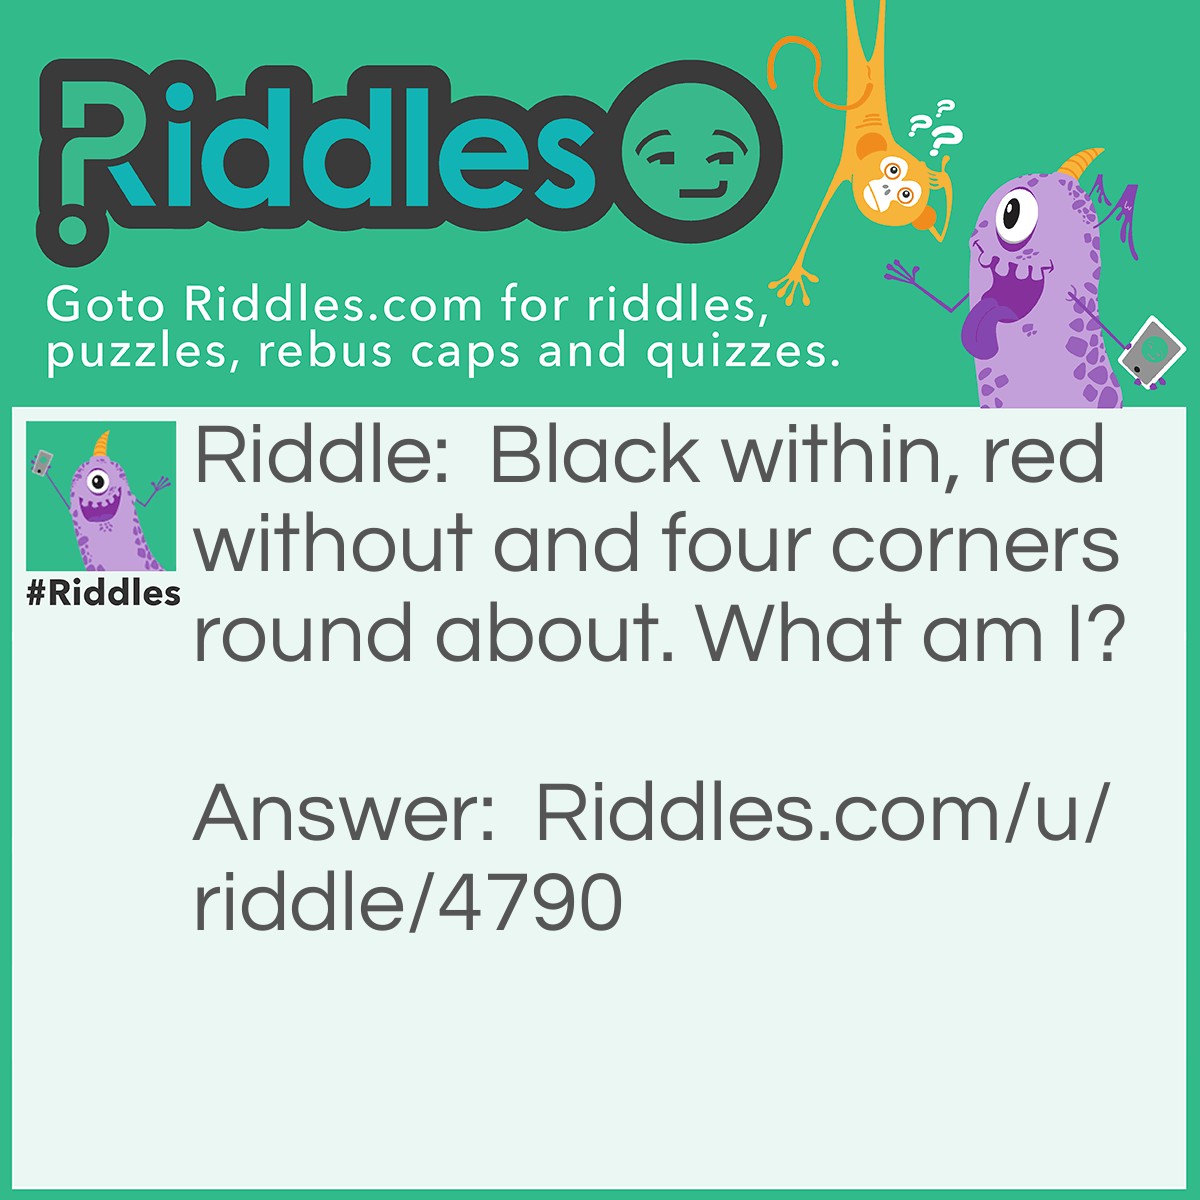 Riddle: Black within, red without and four corners round about. What am I? Answer: A chimney.